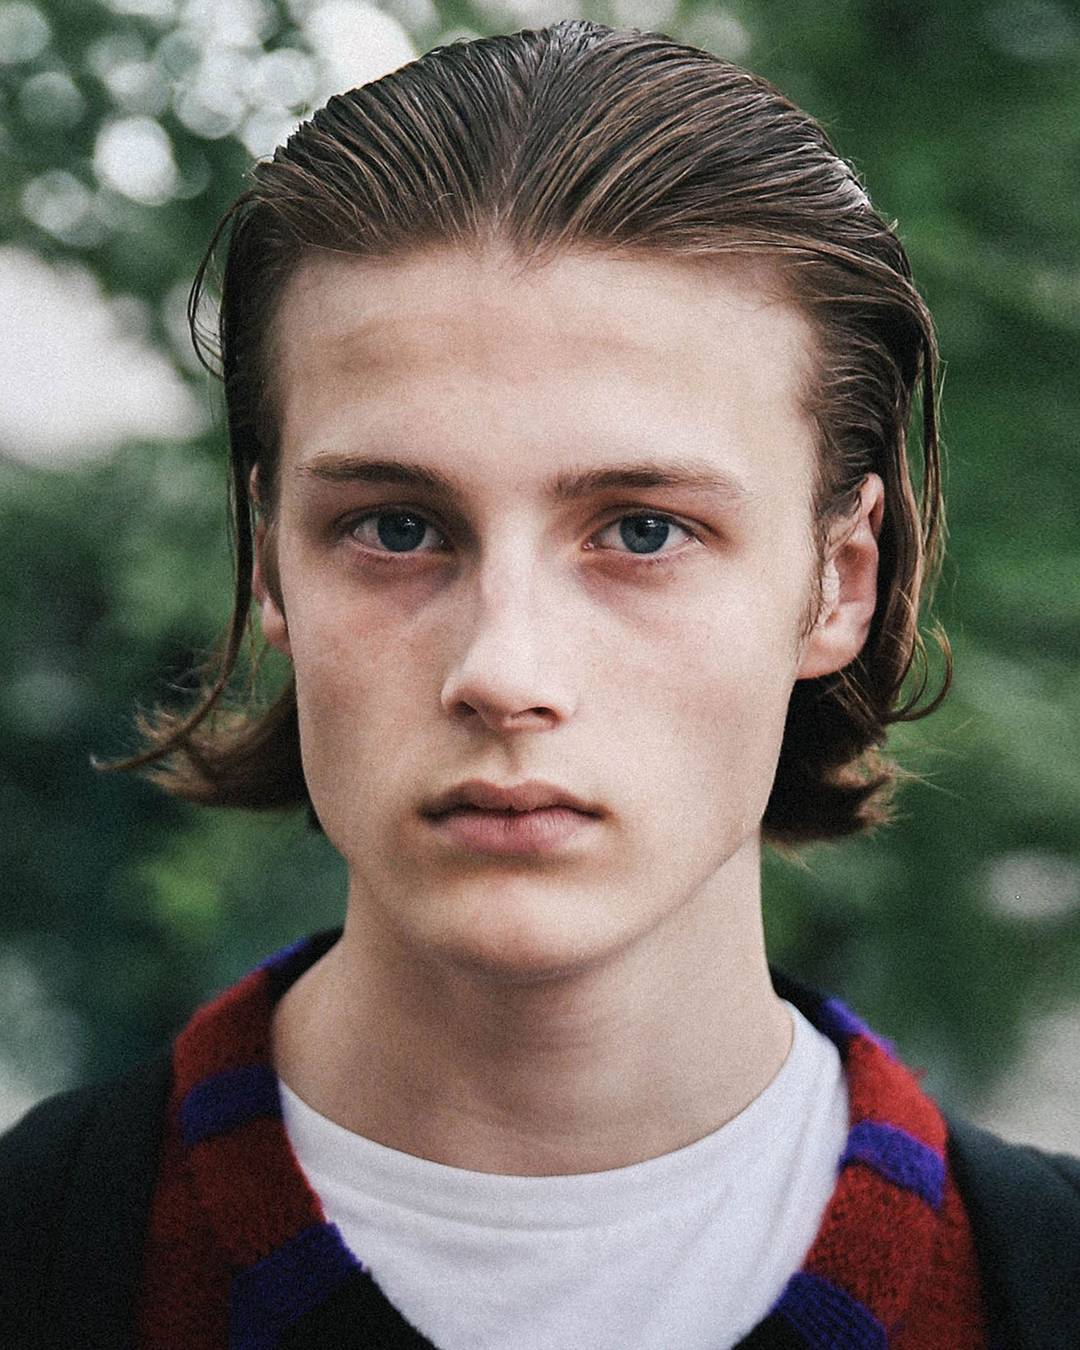 Beauty and Body of Male : Hugh Laughton Scott at LCM S/S 2017 (via)